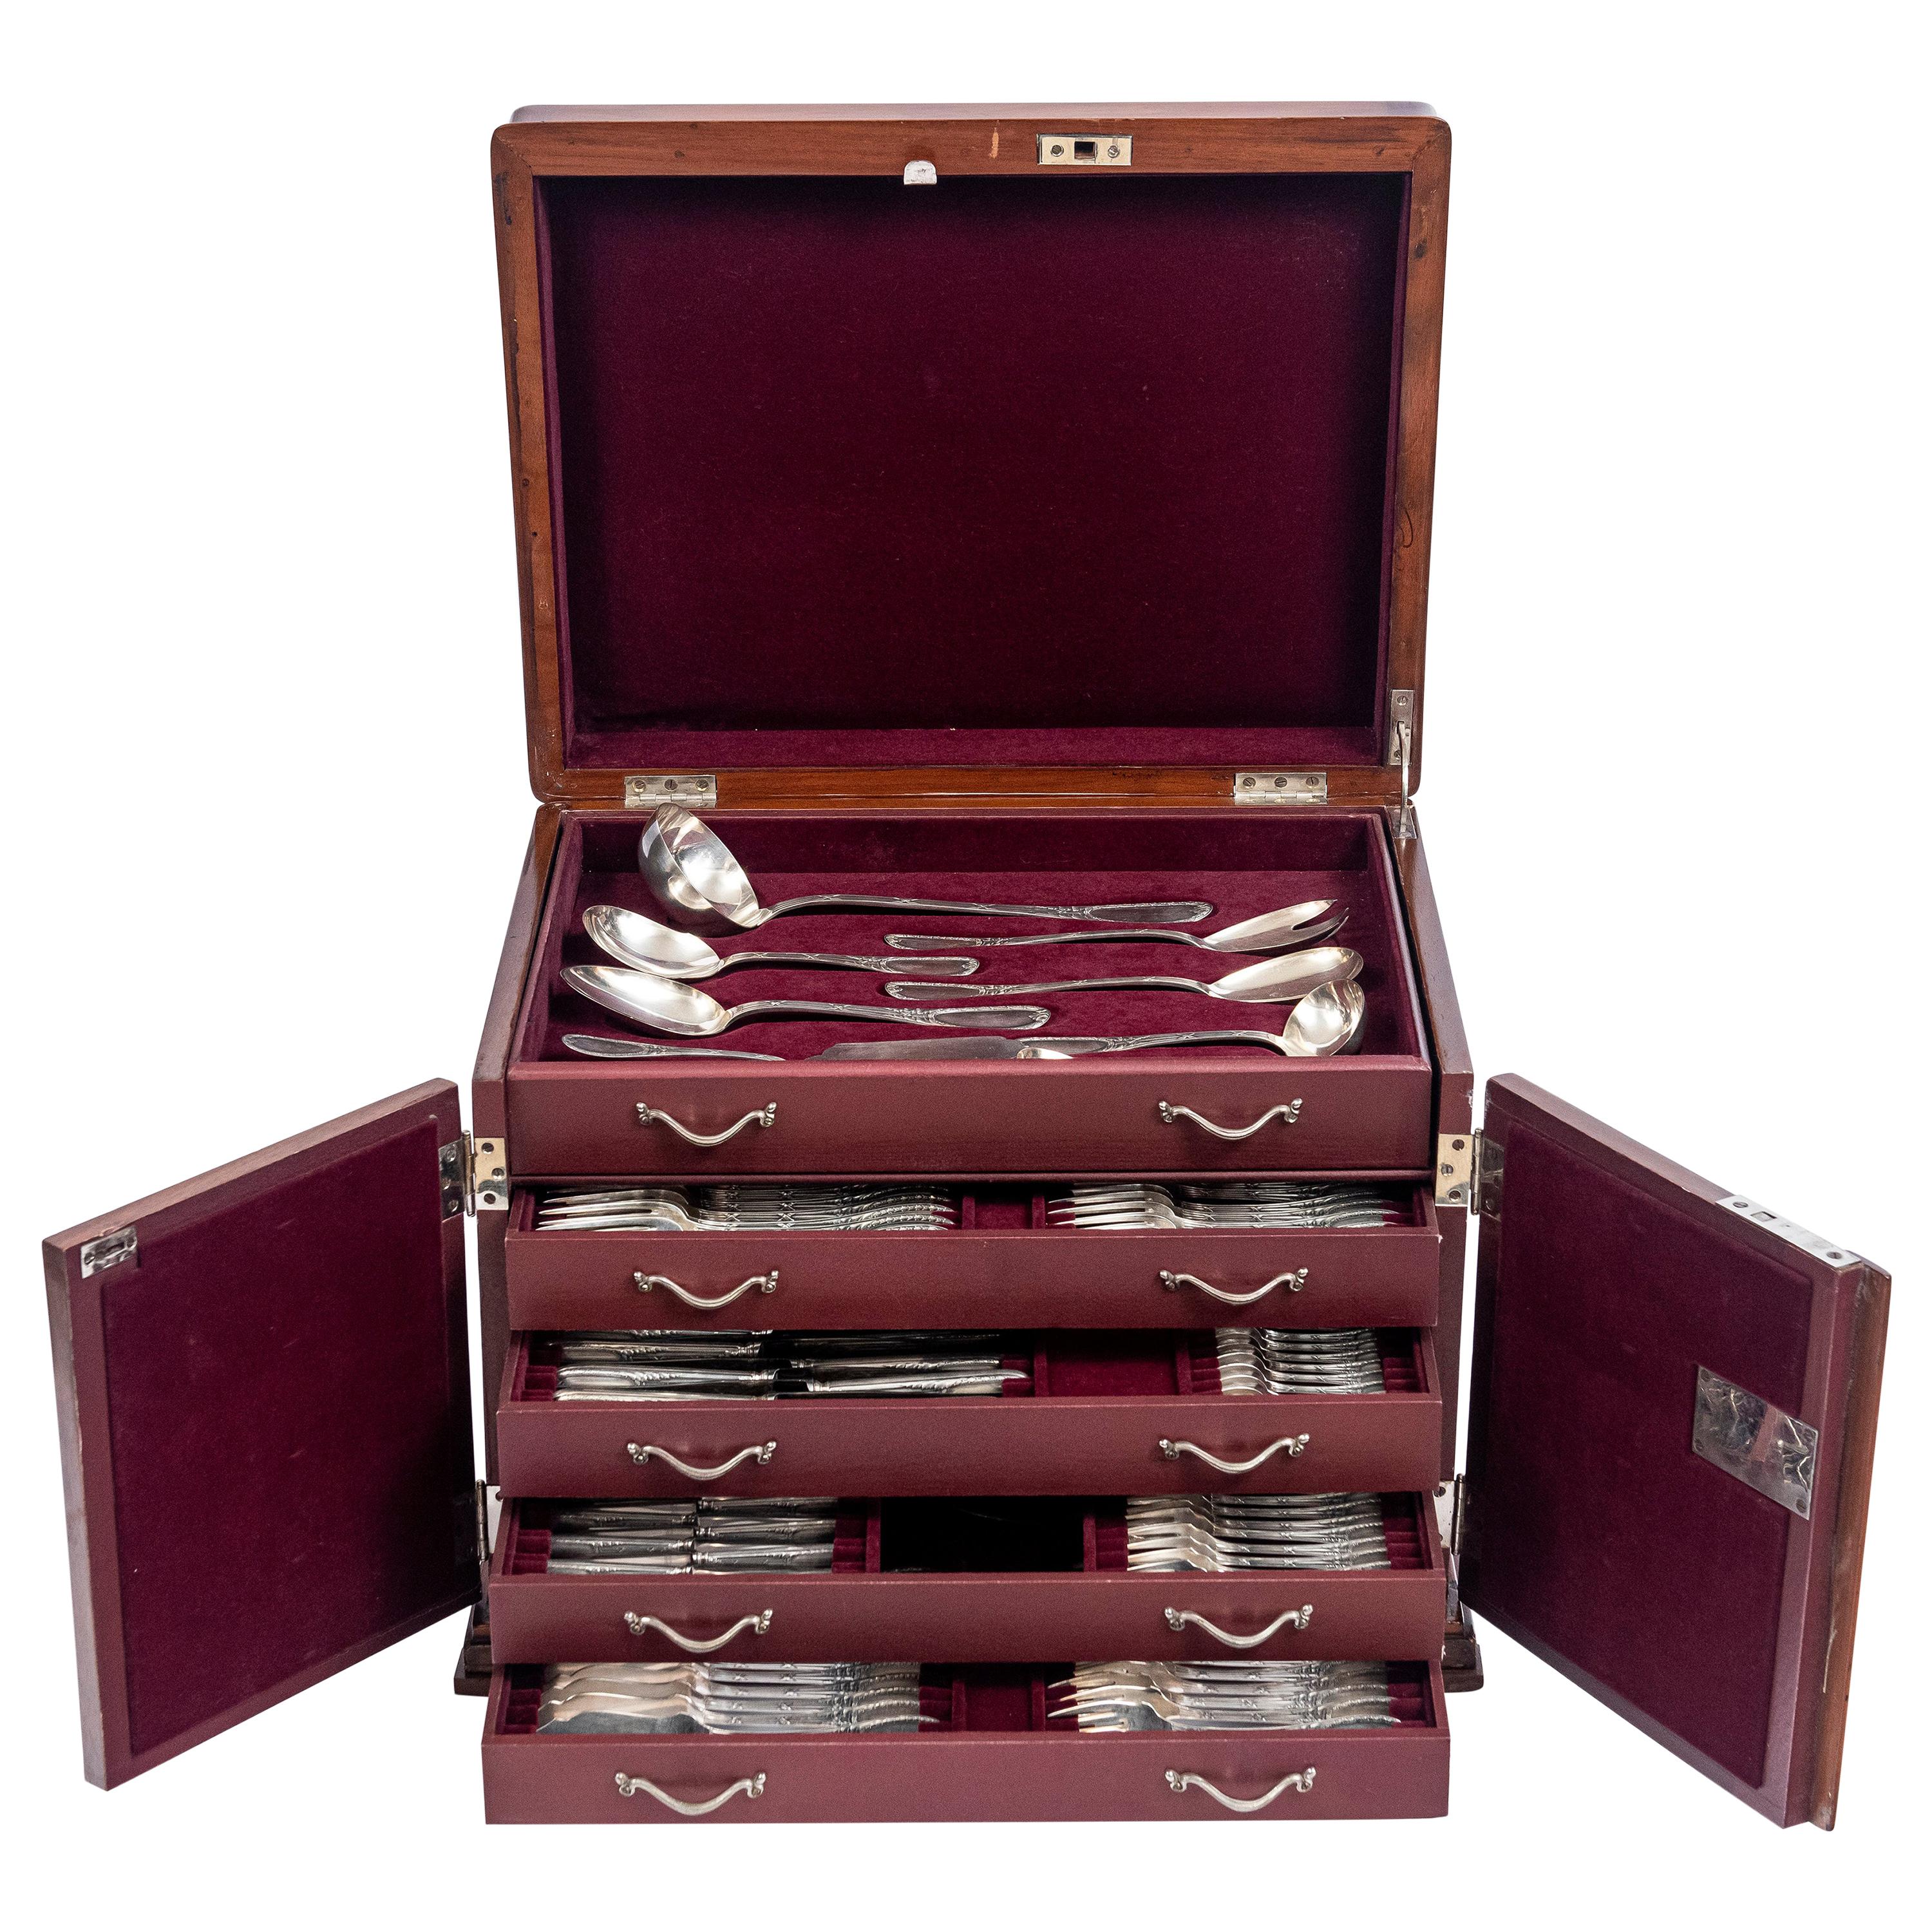 Silver 925 Cutlery Set for 12 People Signed Bruckmann Germany Late 19th Century